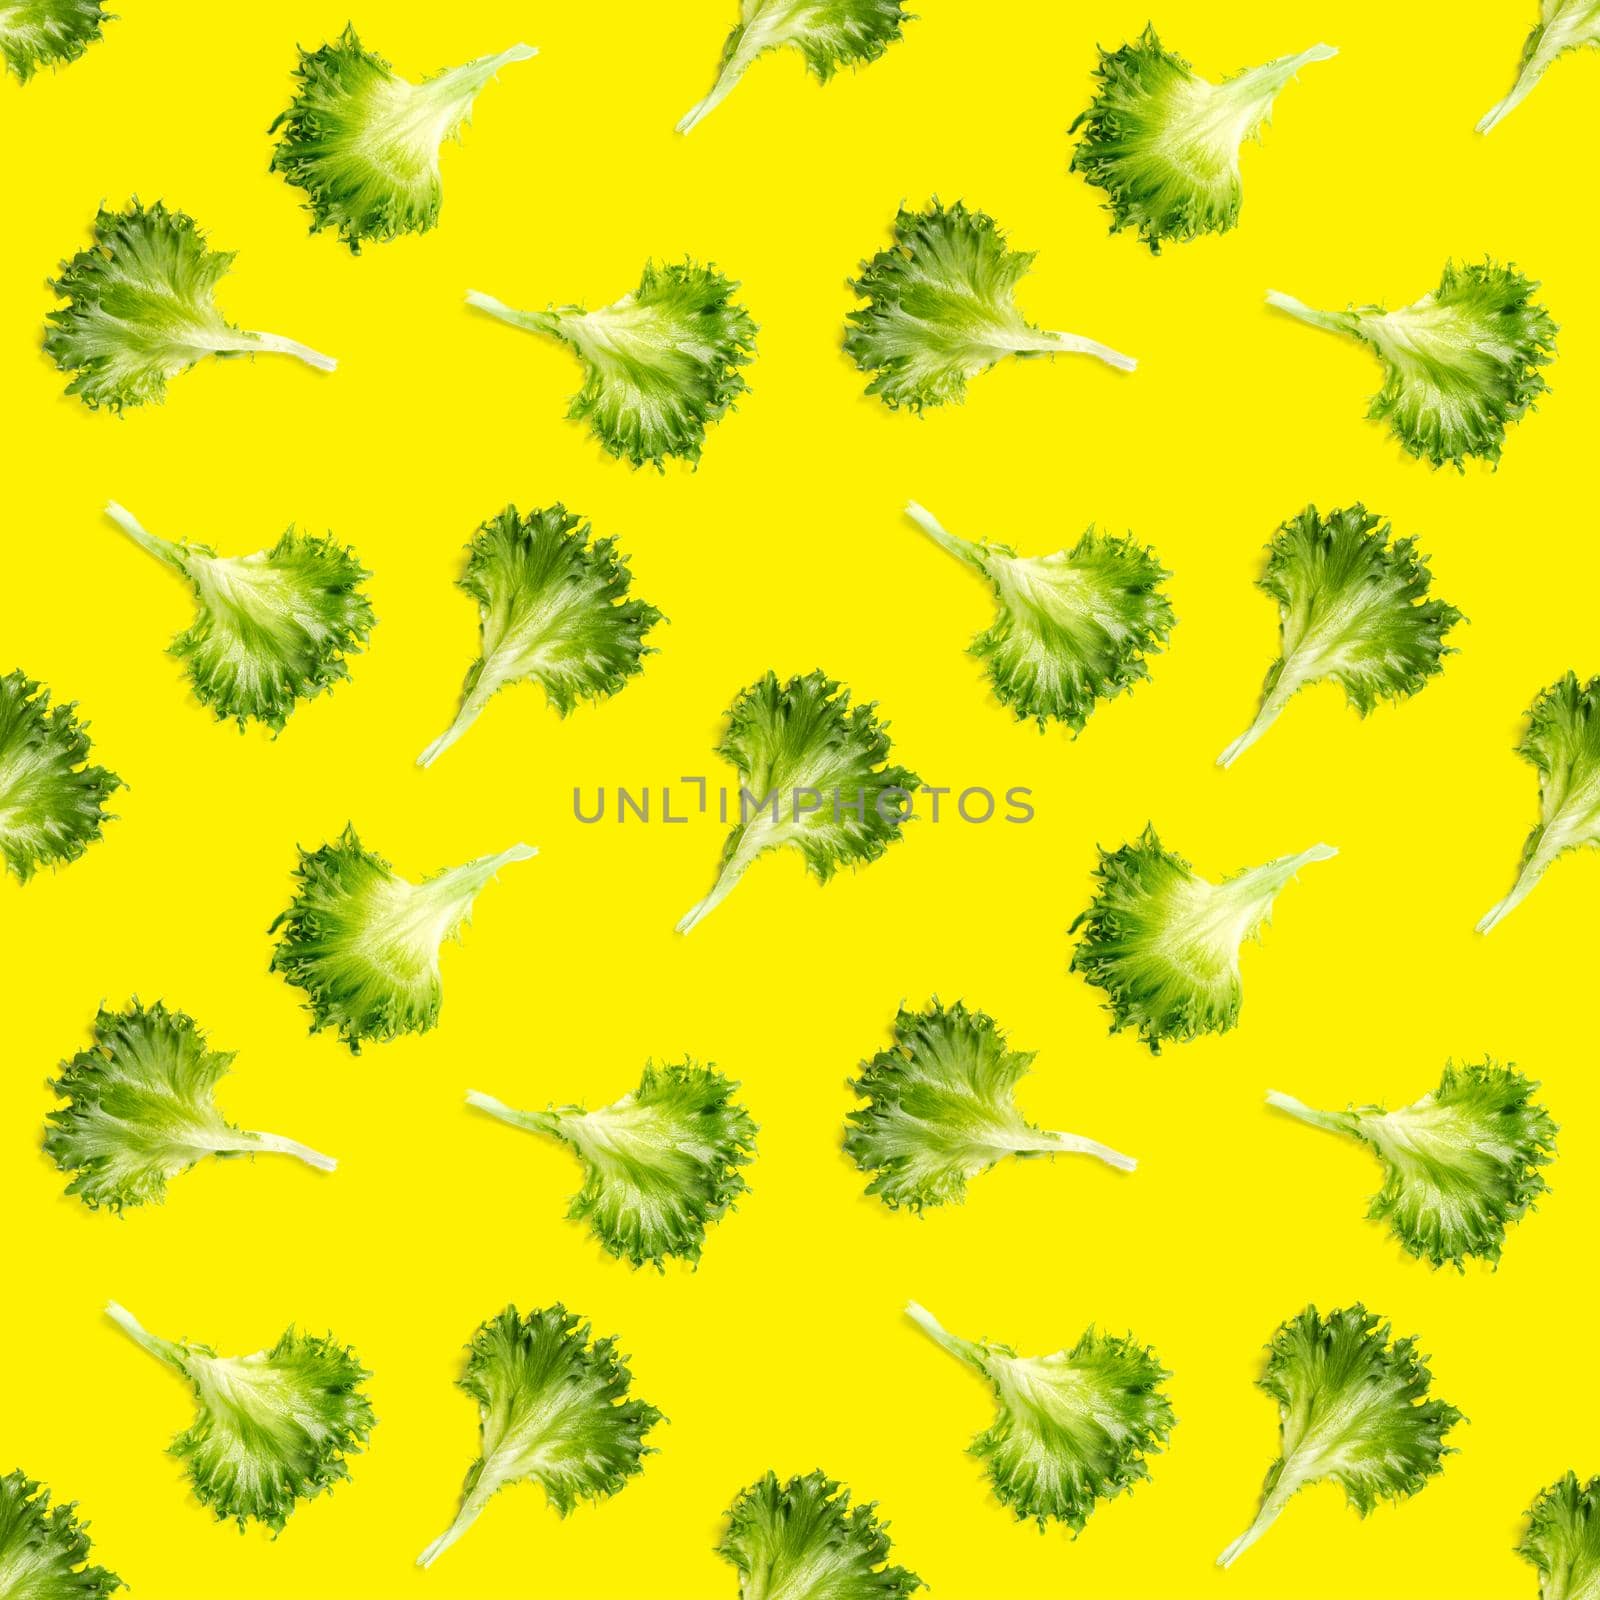 seamless pattern from lettuce green leaves salad. frillice salad isolated on yellow. iceberg salad leaf close up, modern background, flat lay. lettuce green leaf pattern